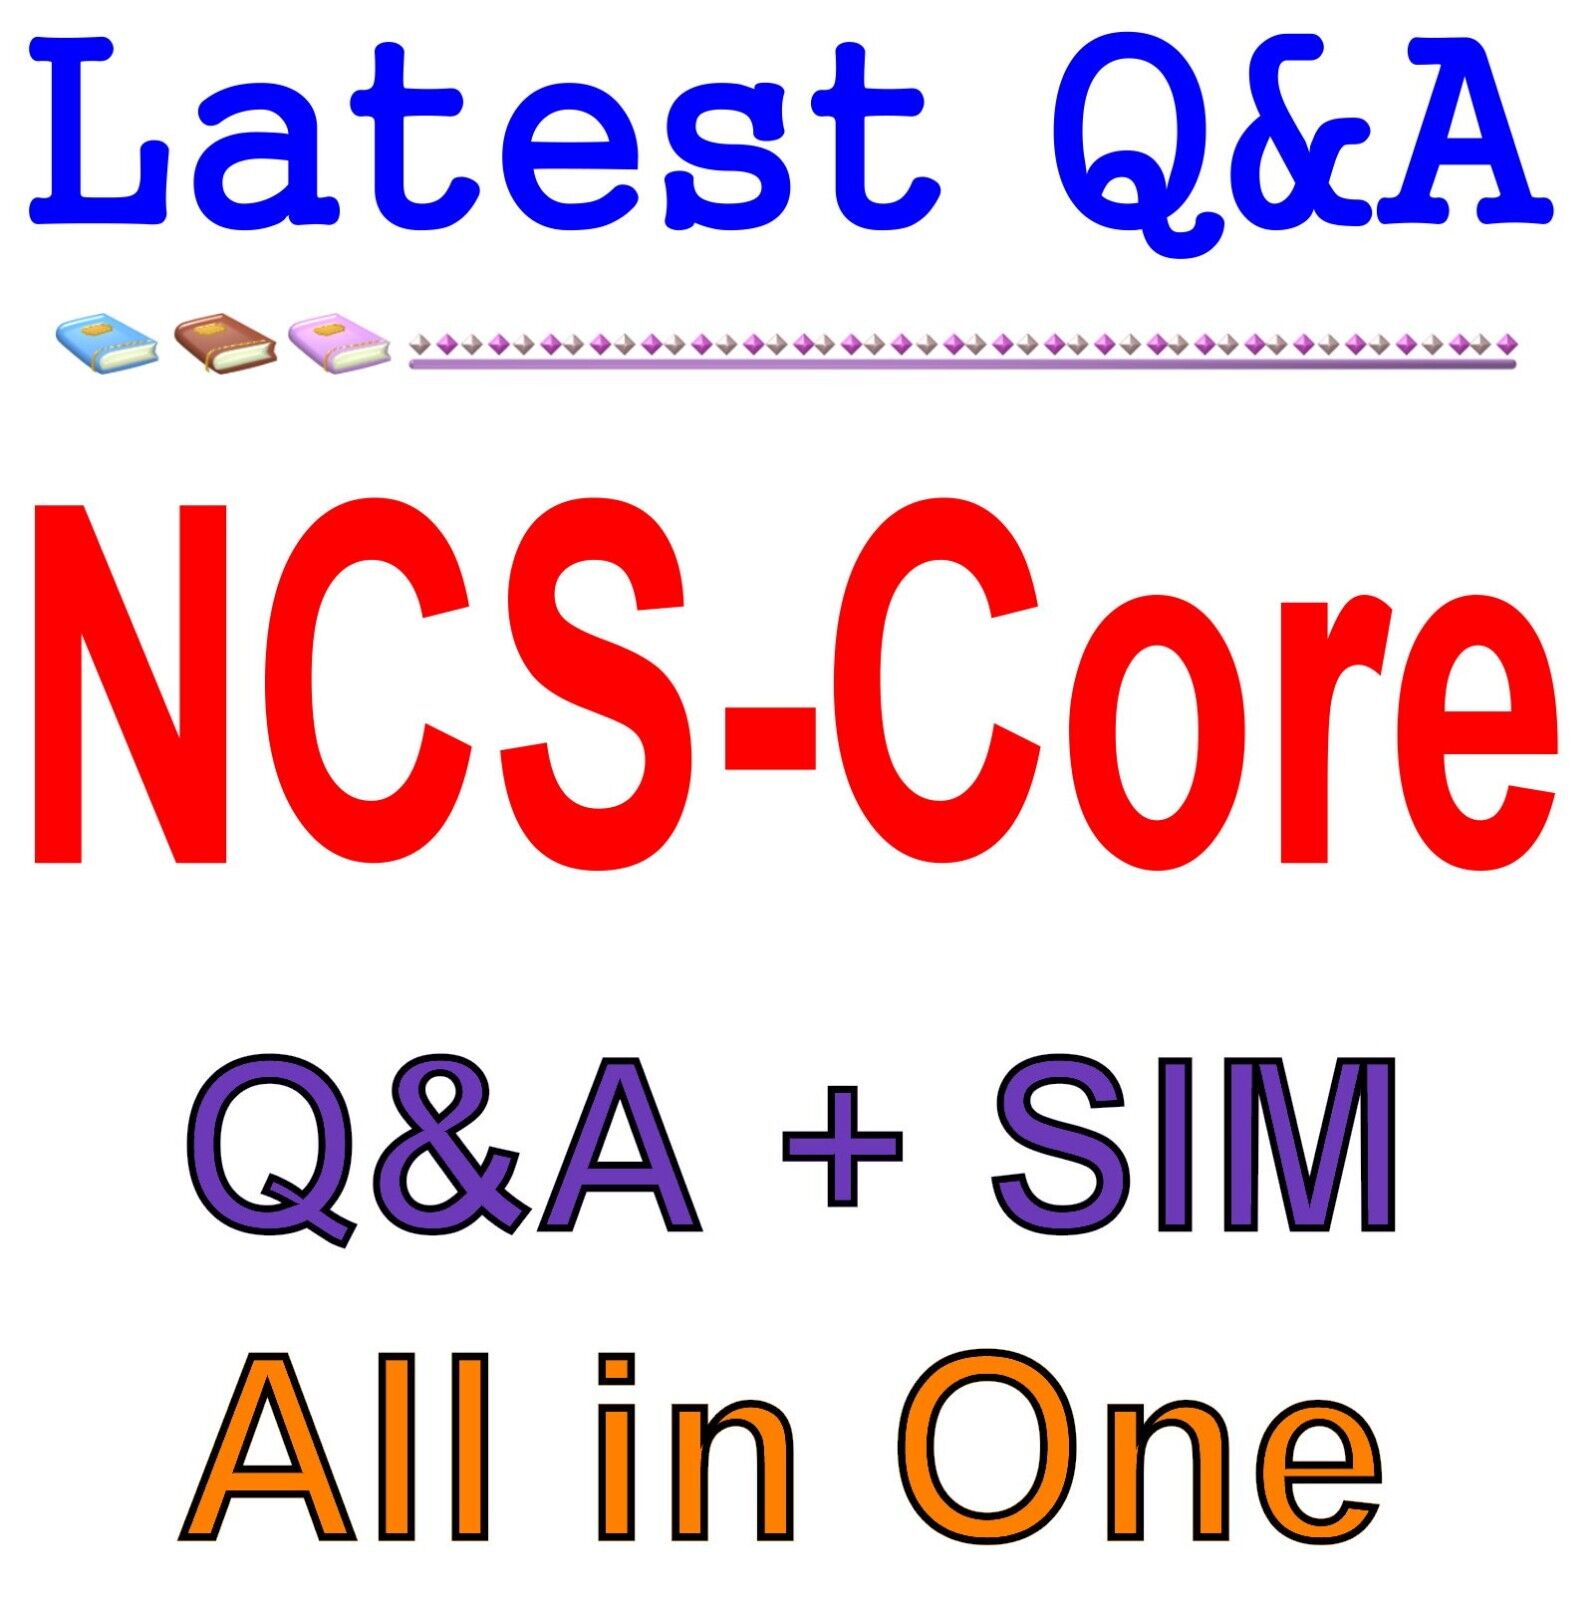 Nutanix Certified Services Core Infrastructure Professional NCS-Core Exam Q&A